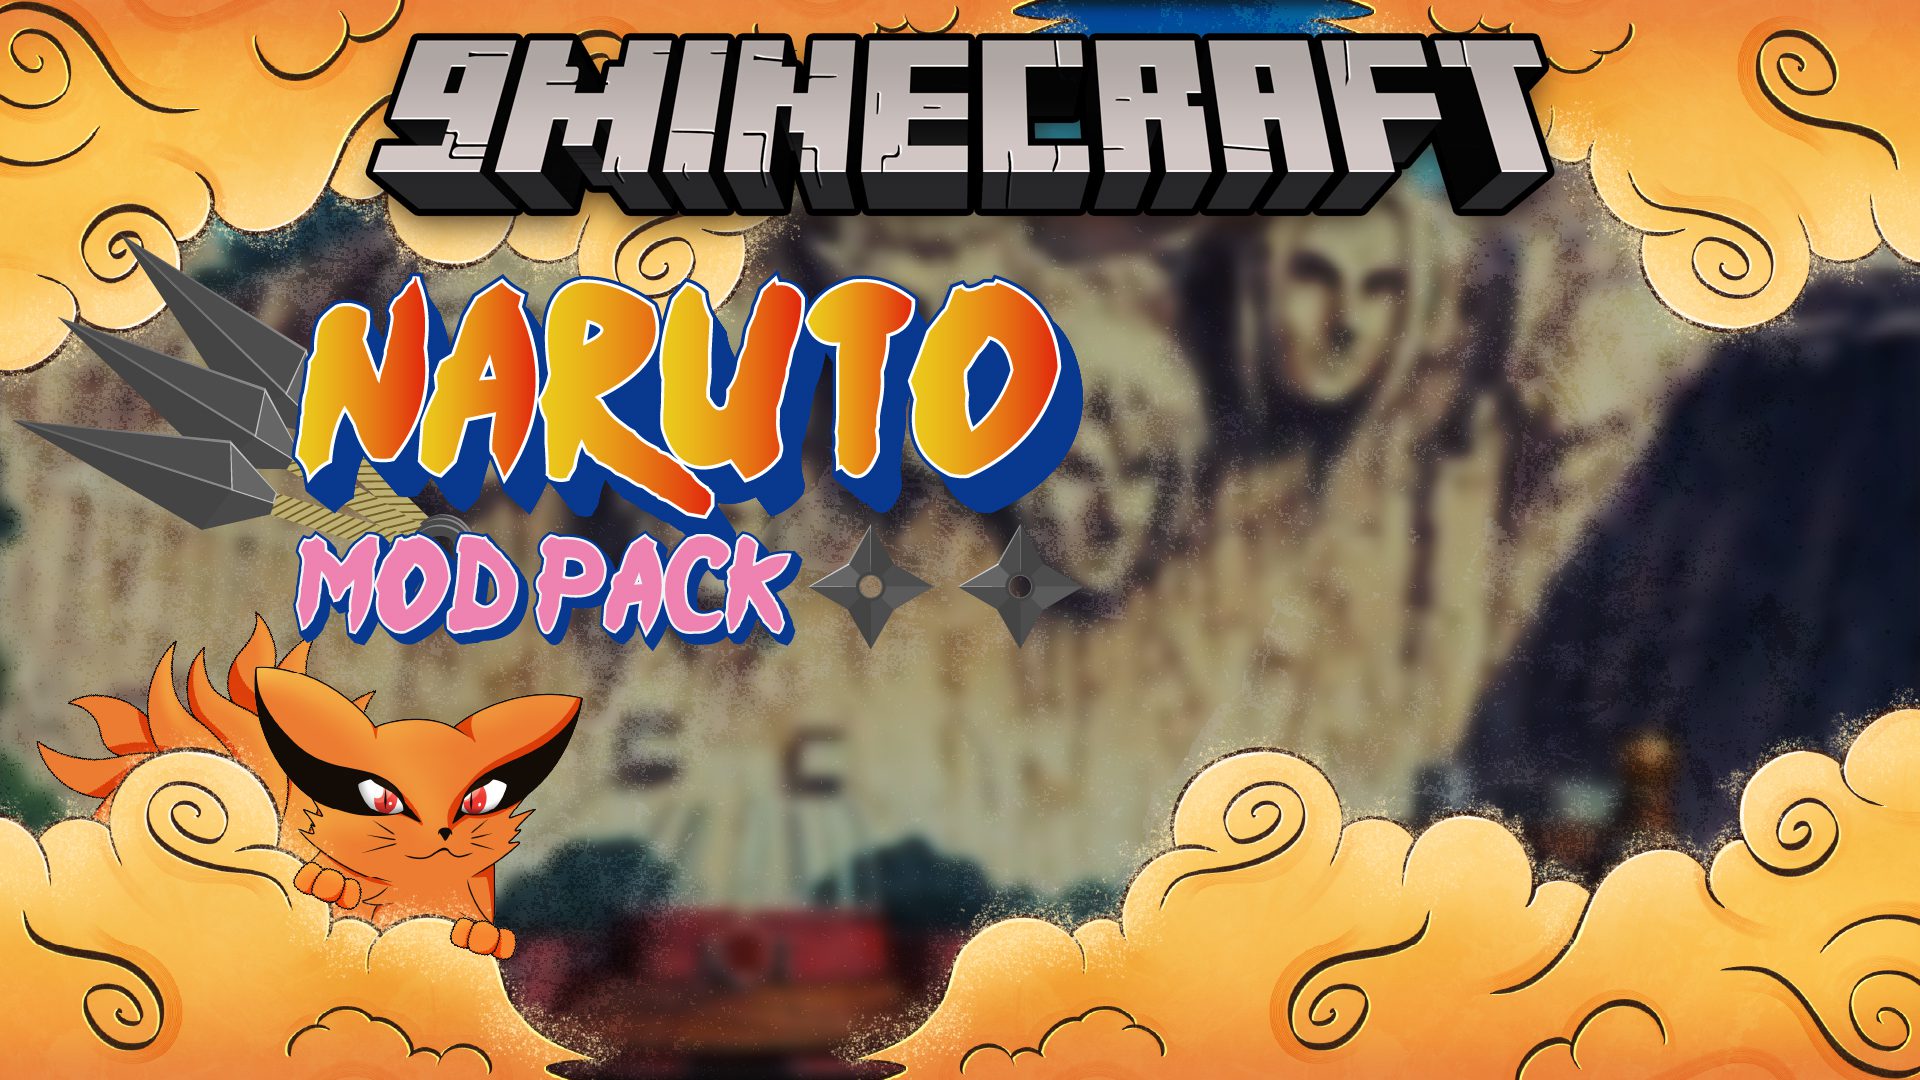 Naruto All Mods Plus Modpack (1.7.10) - Fight as A Ninja with Technics 1